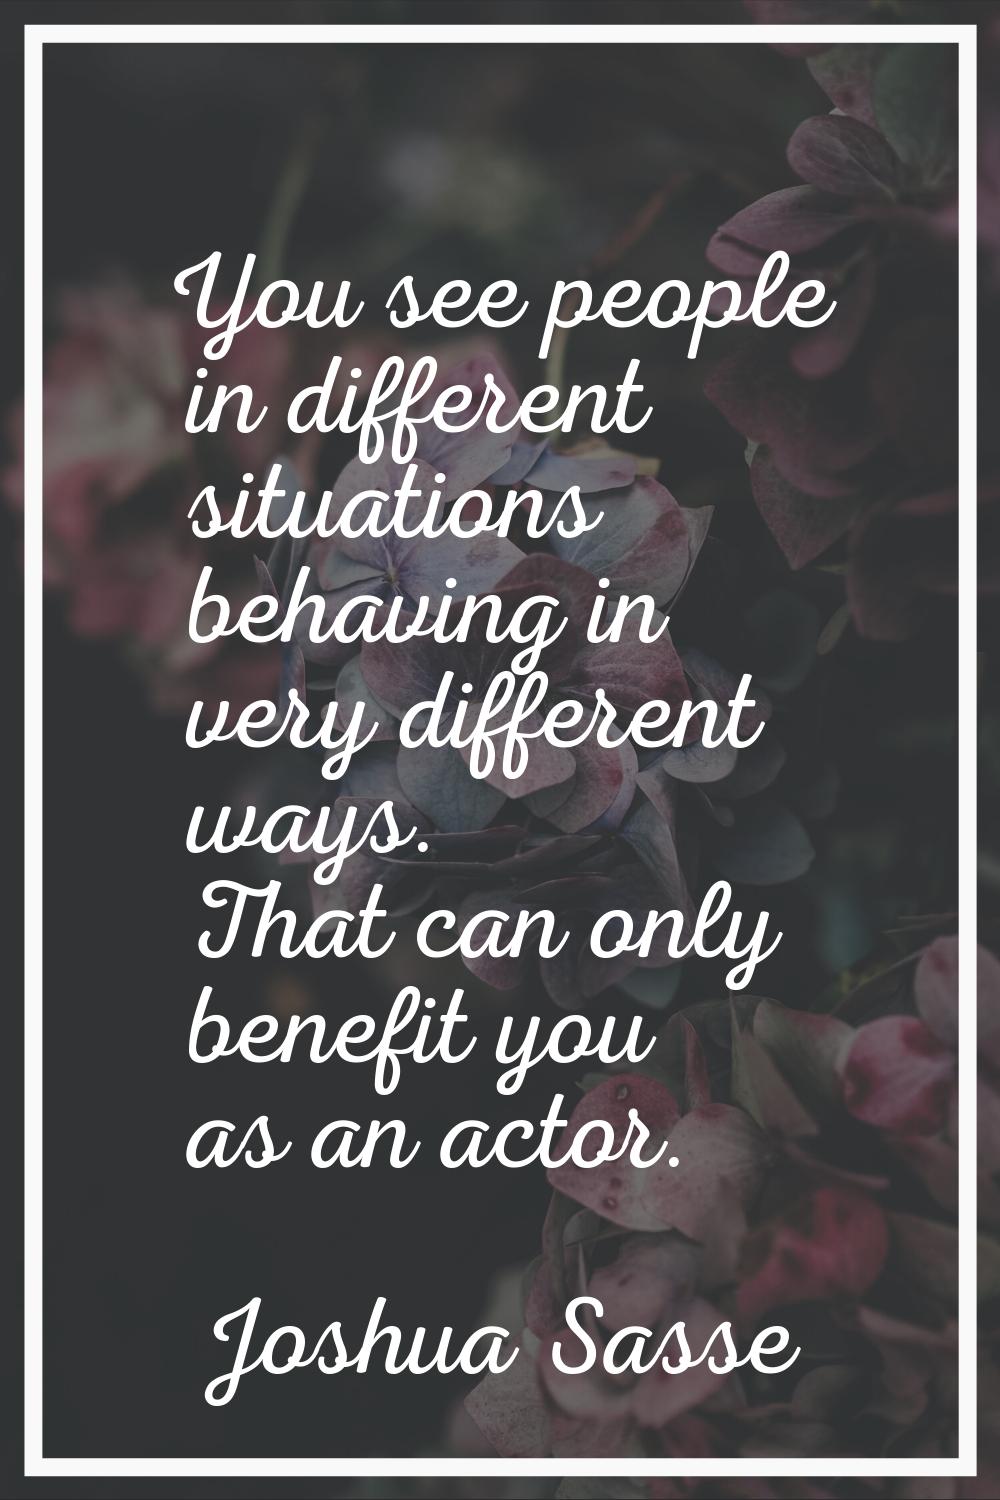 You see people in different situations behaving in very different ways. That can only benefit you a